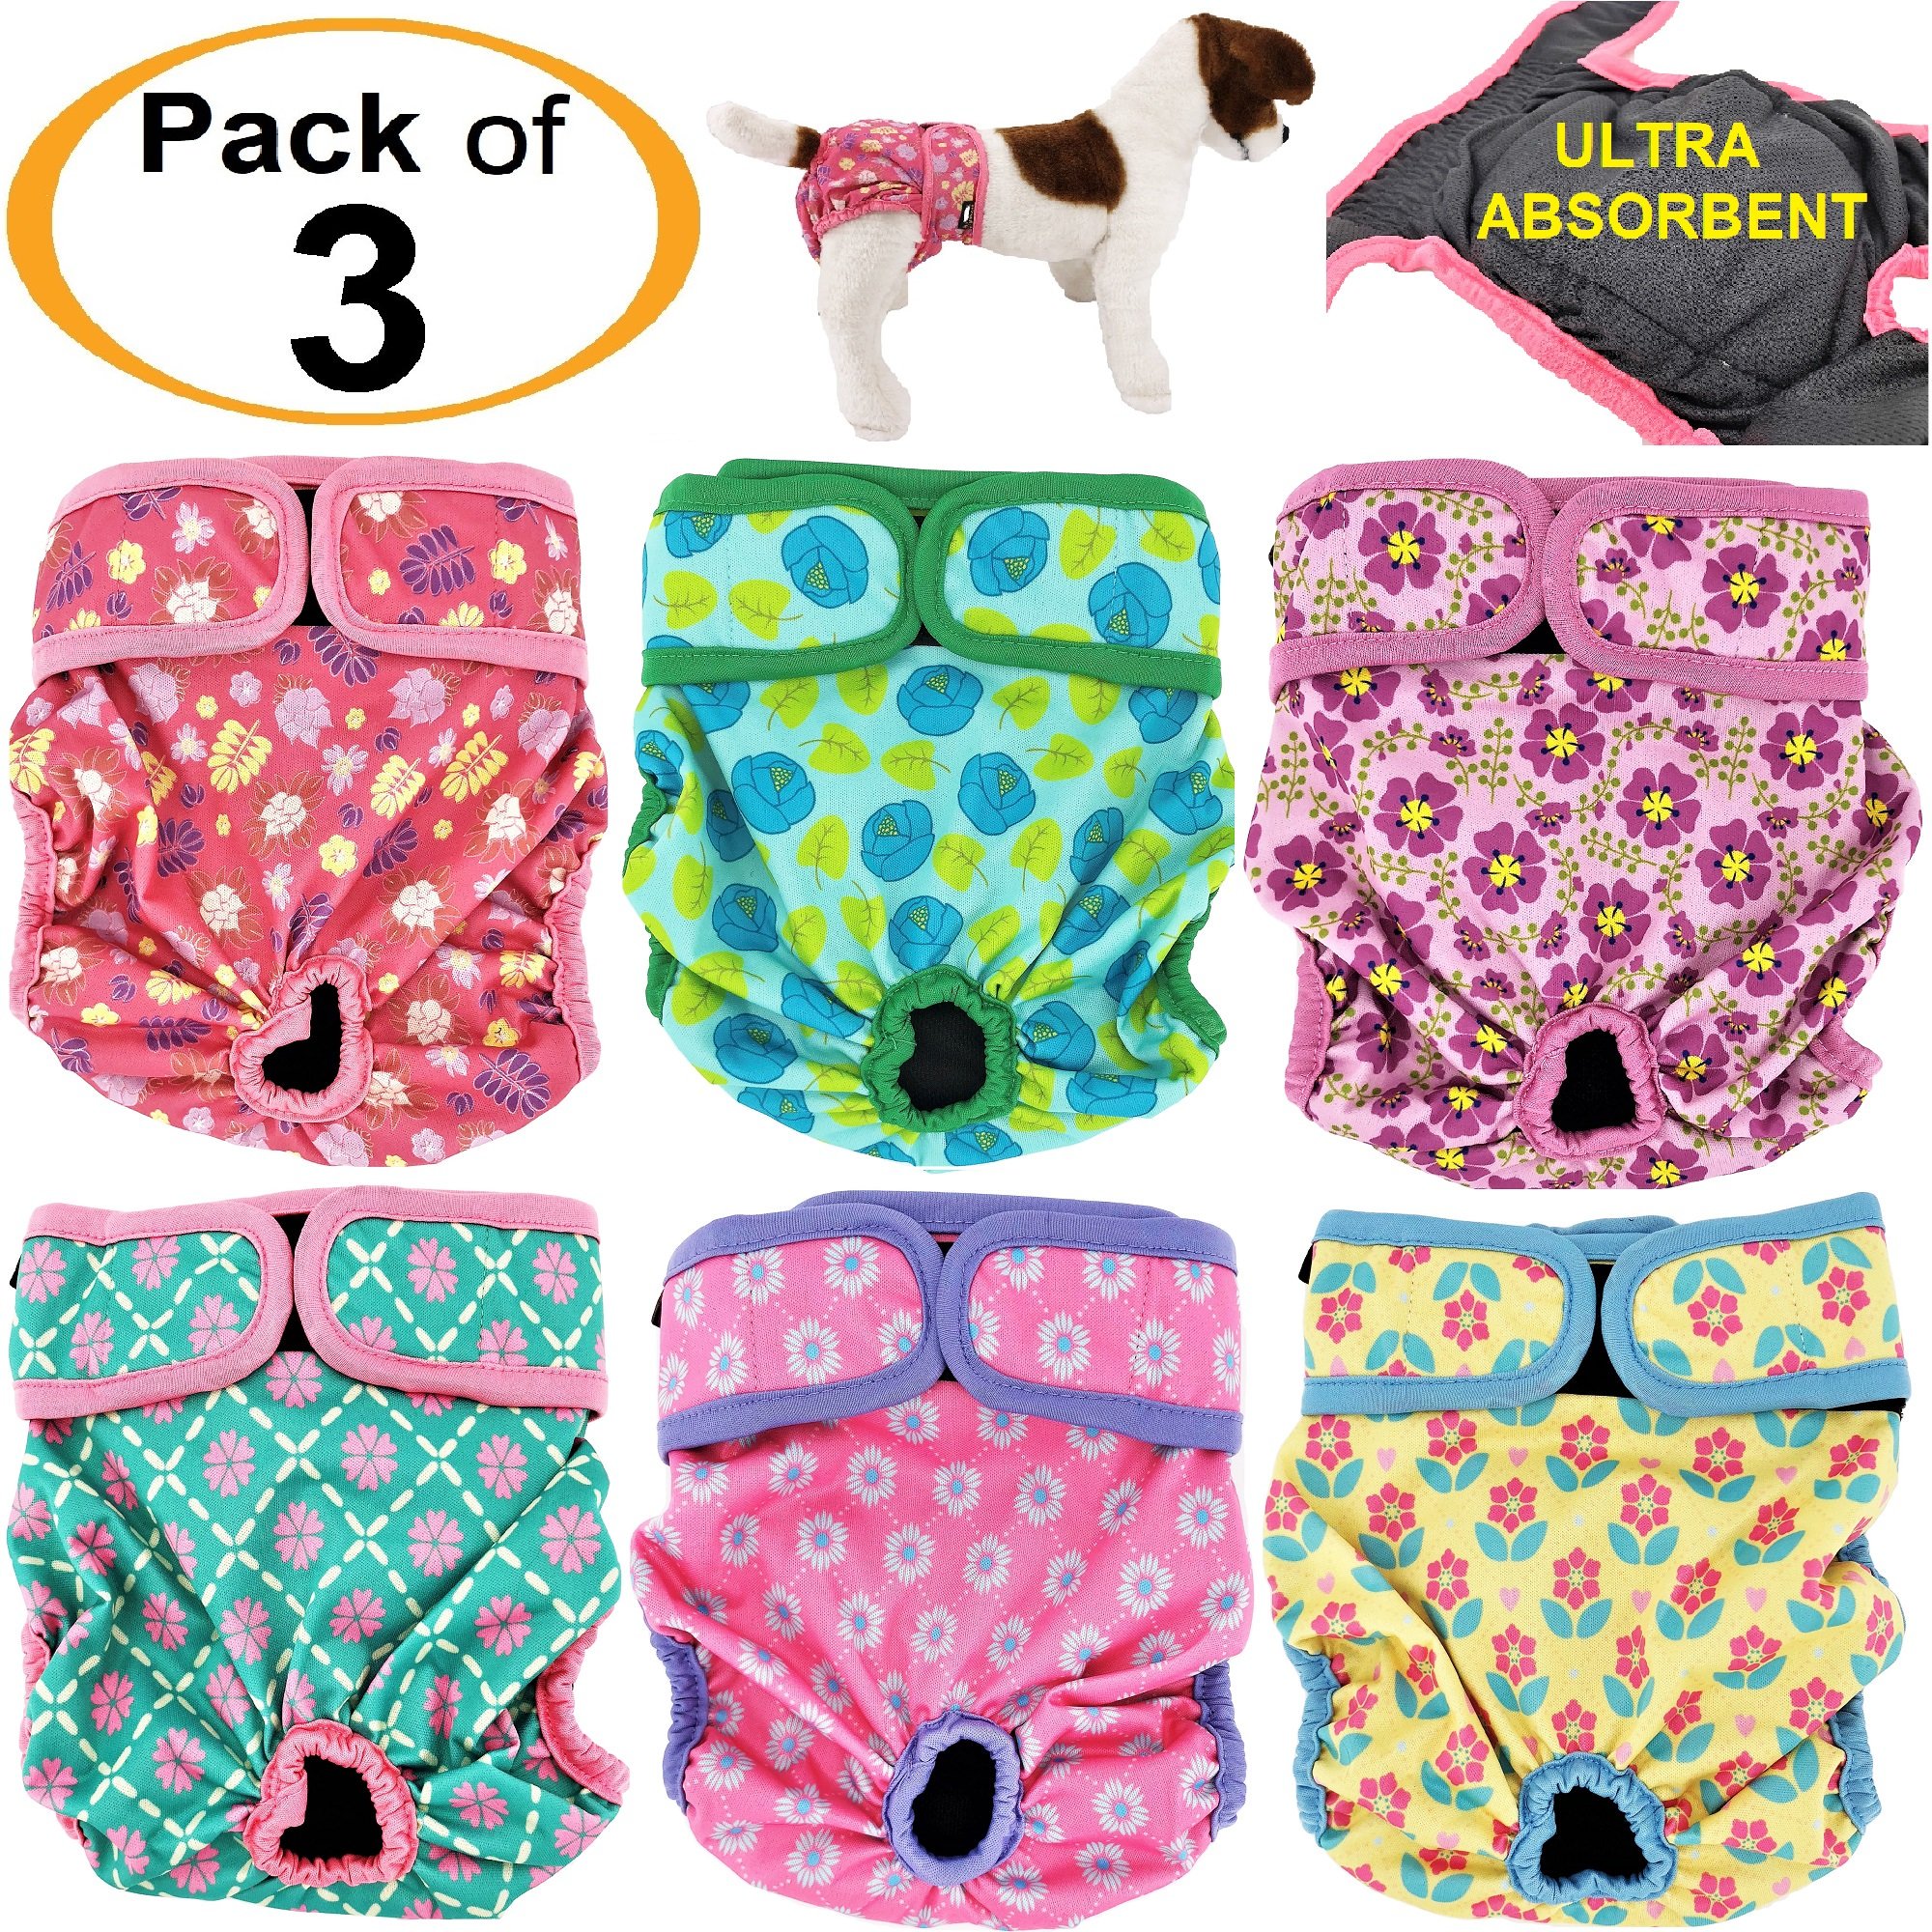 PACK of 3 Female Dog Diapers with 4 LAYERS of Absorbent ...